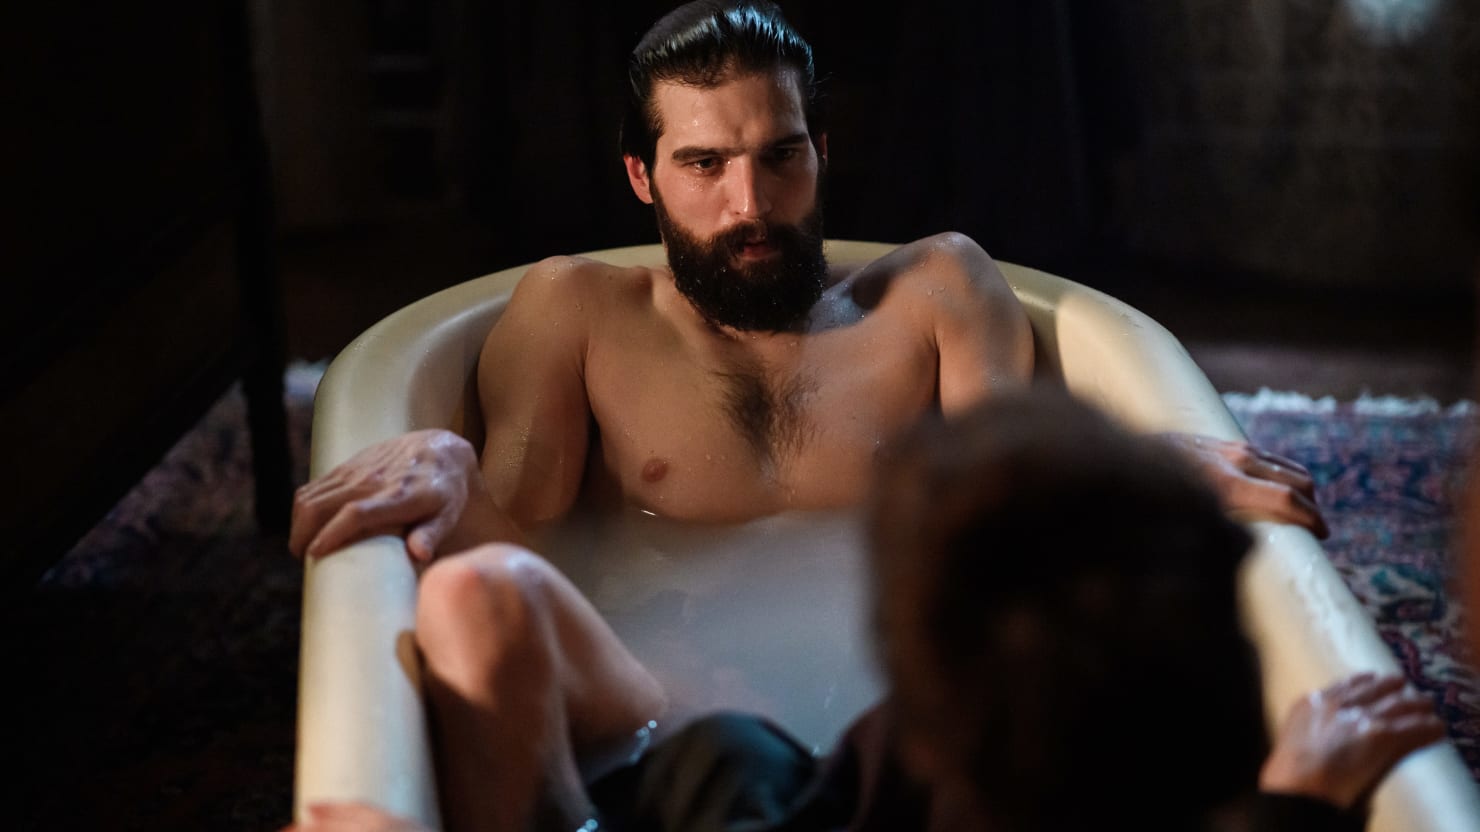 Netflixs Freud Depicts Sigmund Freud as a Horny, Coked-Out Demon Hunter